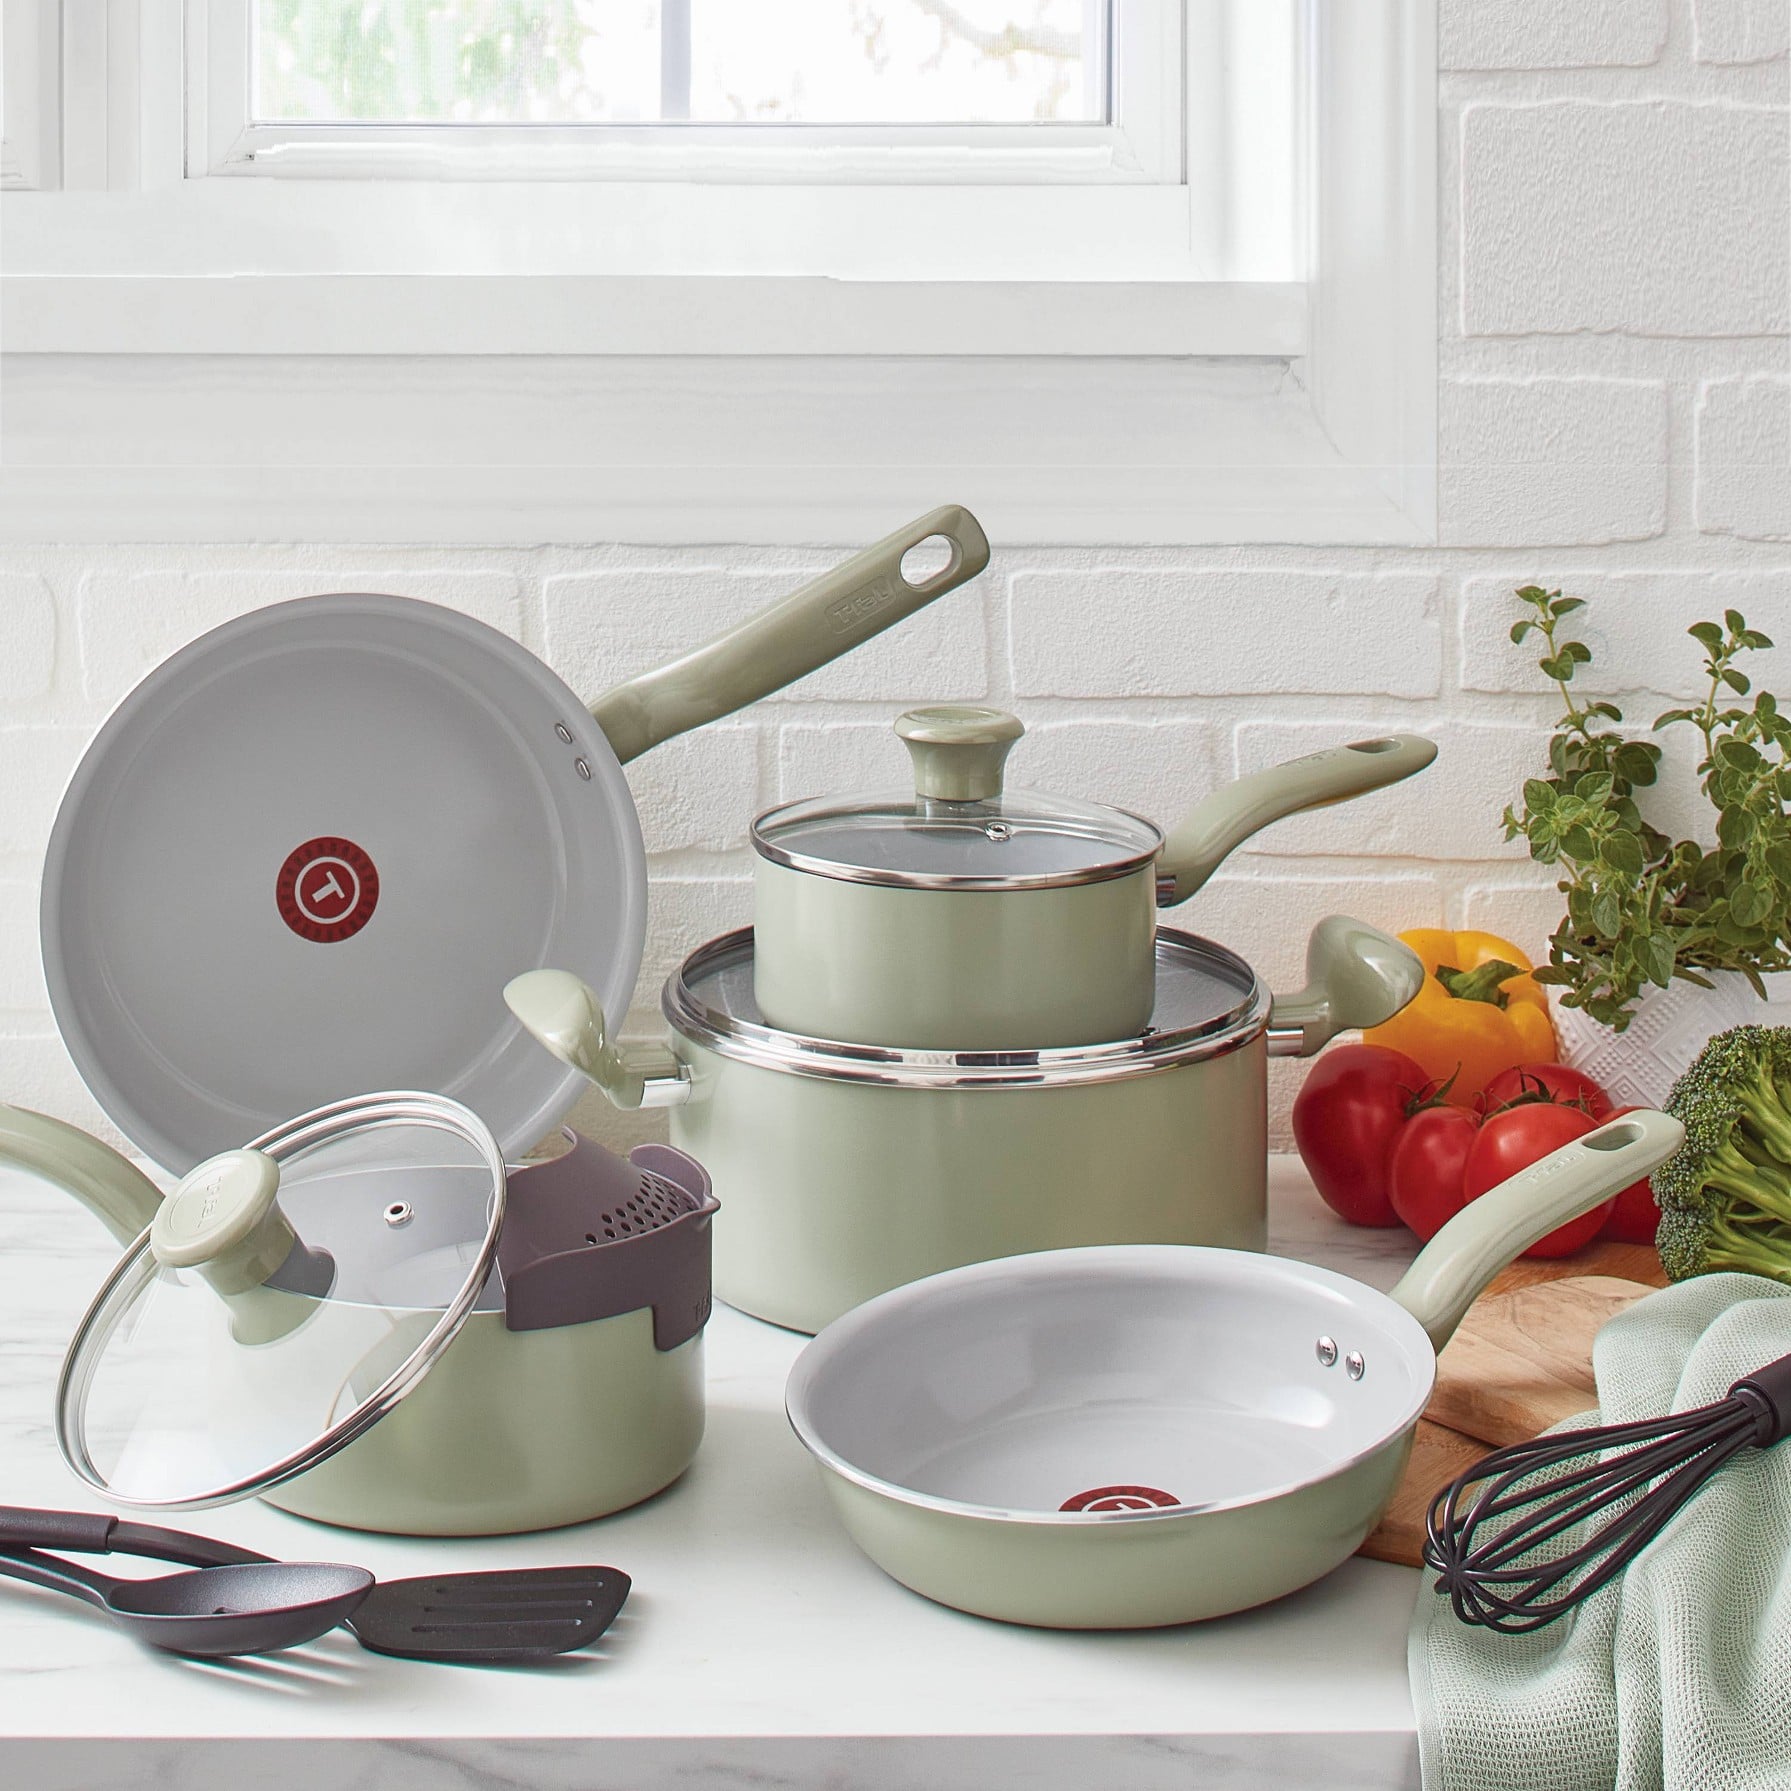 Nonstick Cookware: T-fal Simply Cook 12pc Ceramic Recycled